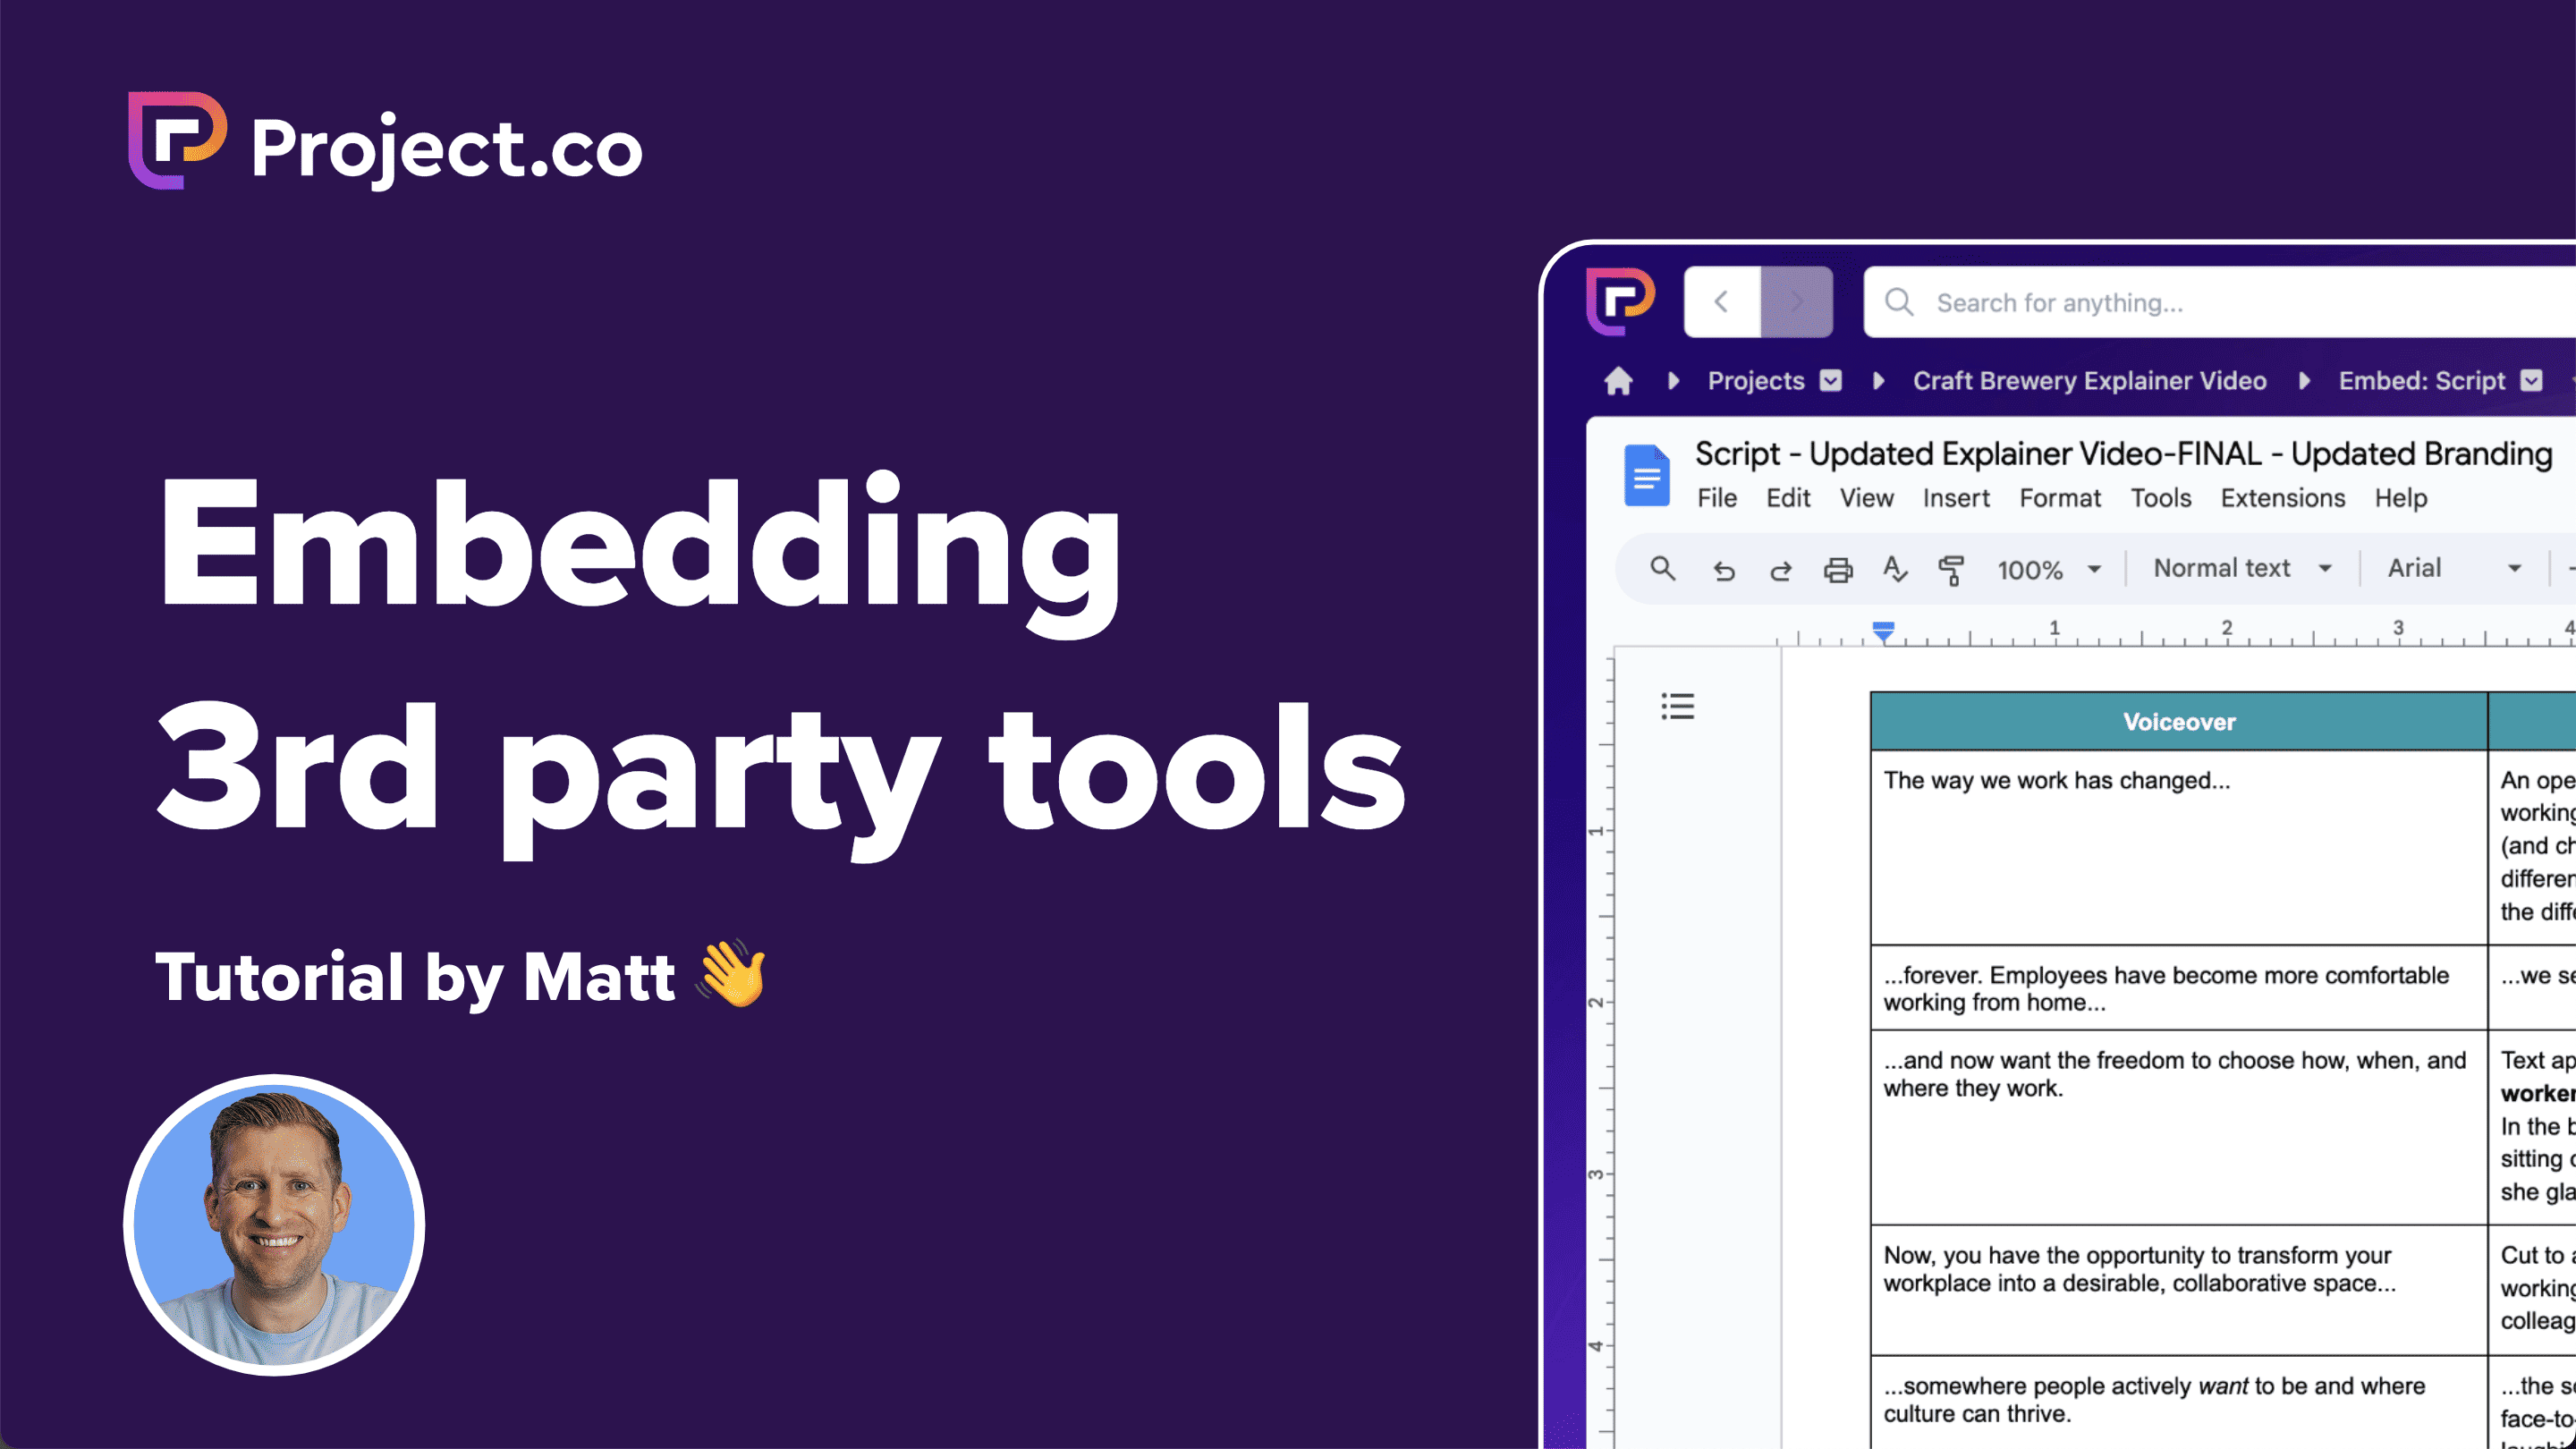 Embedding 3rd party tools